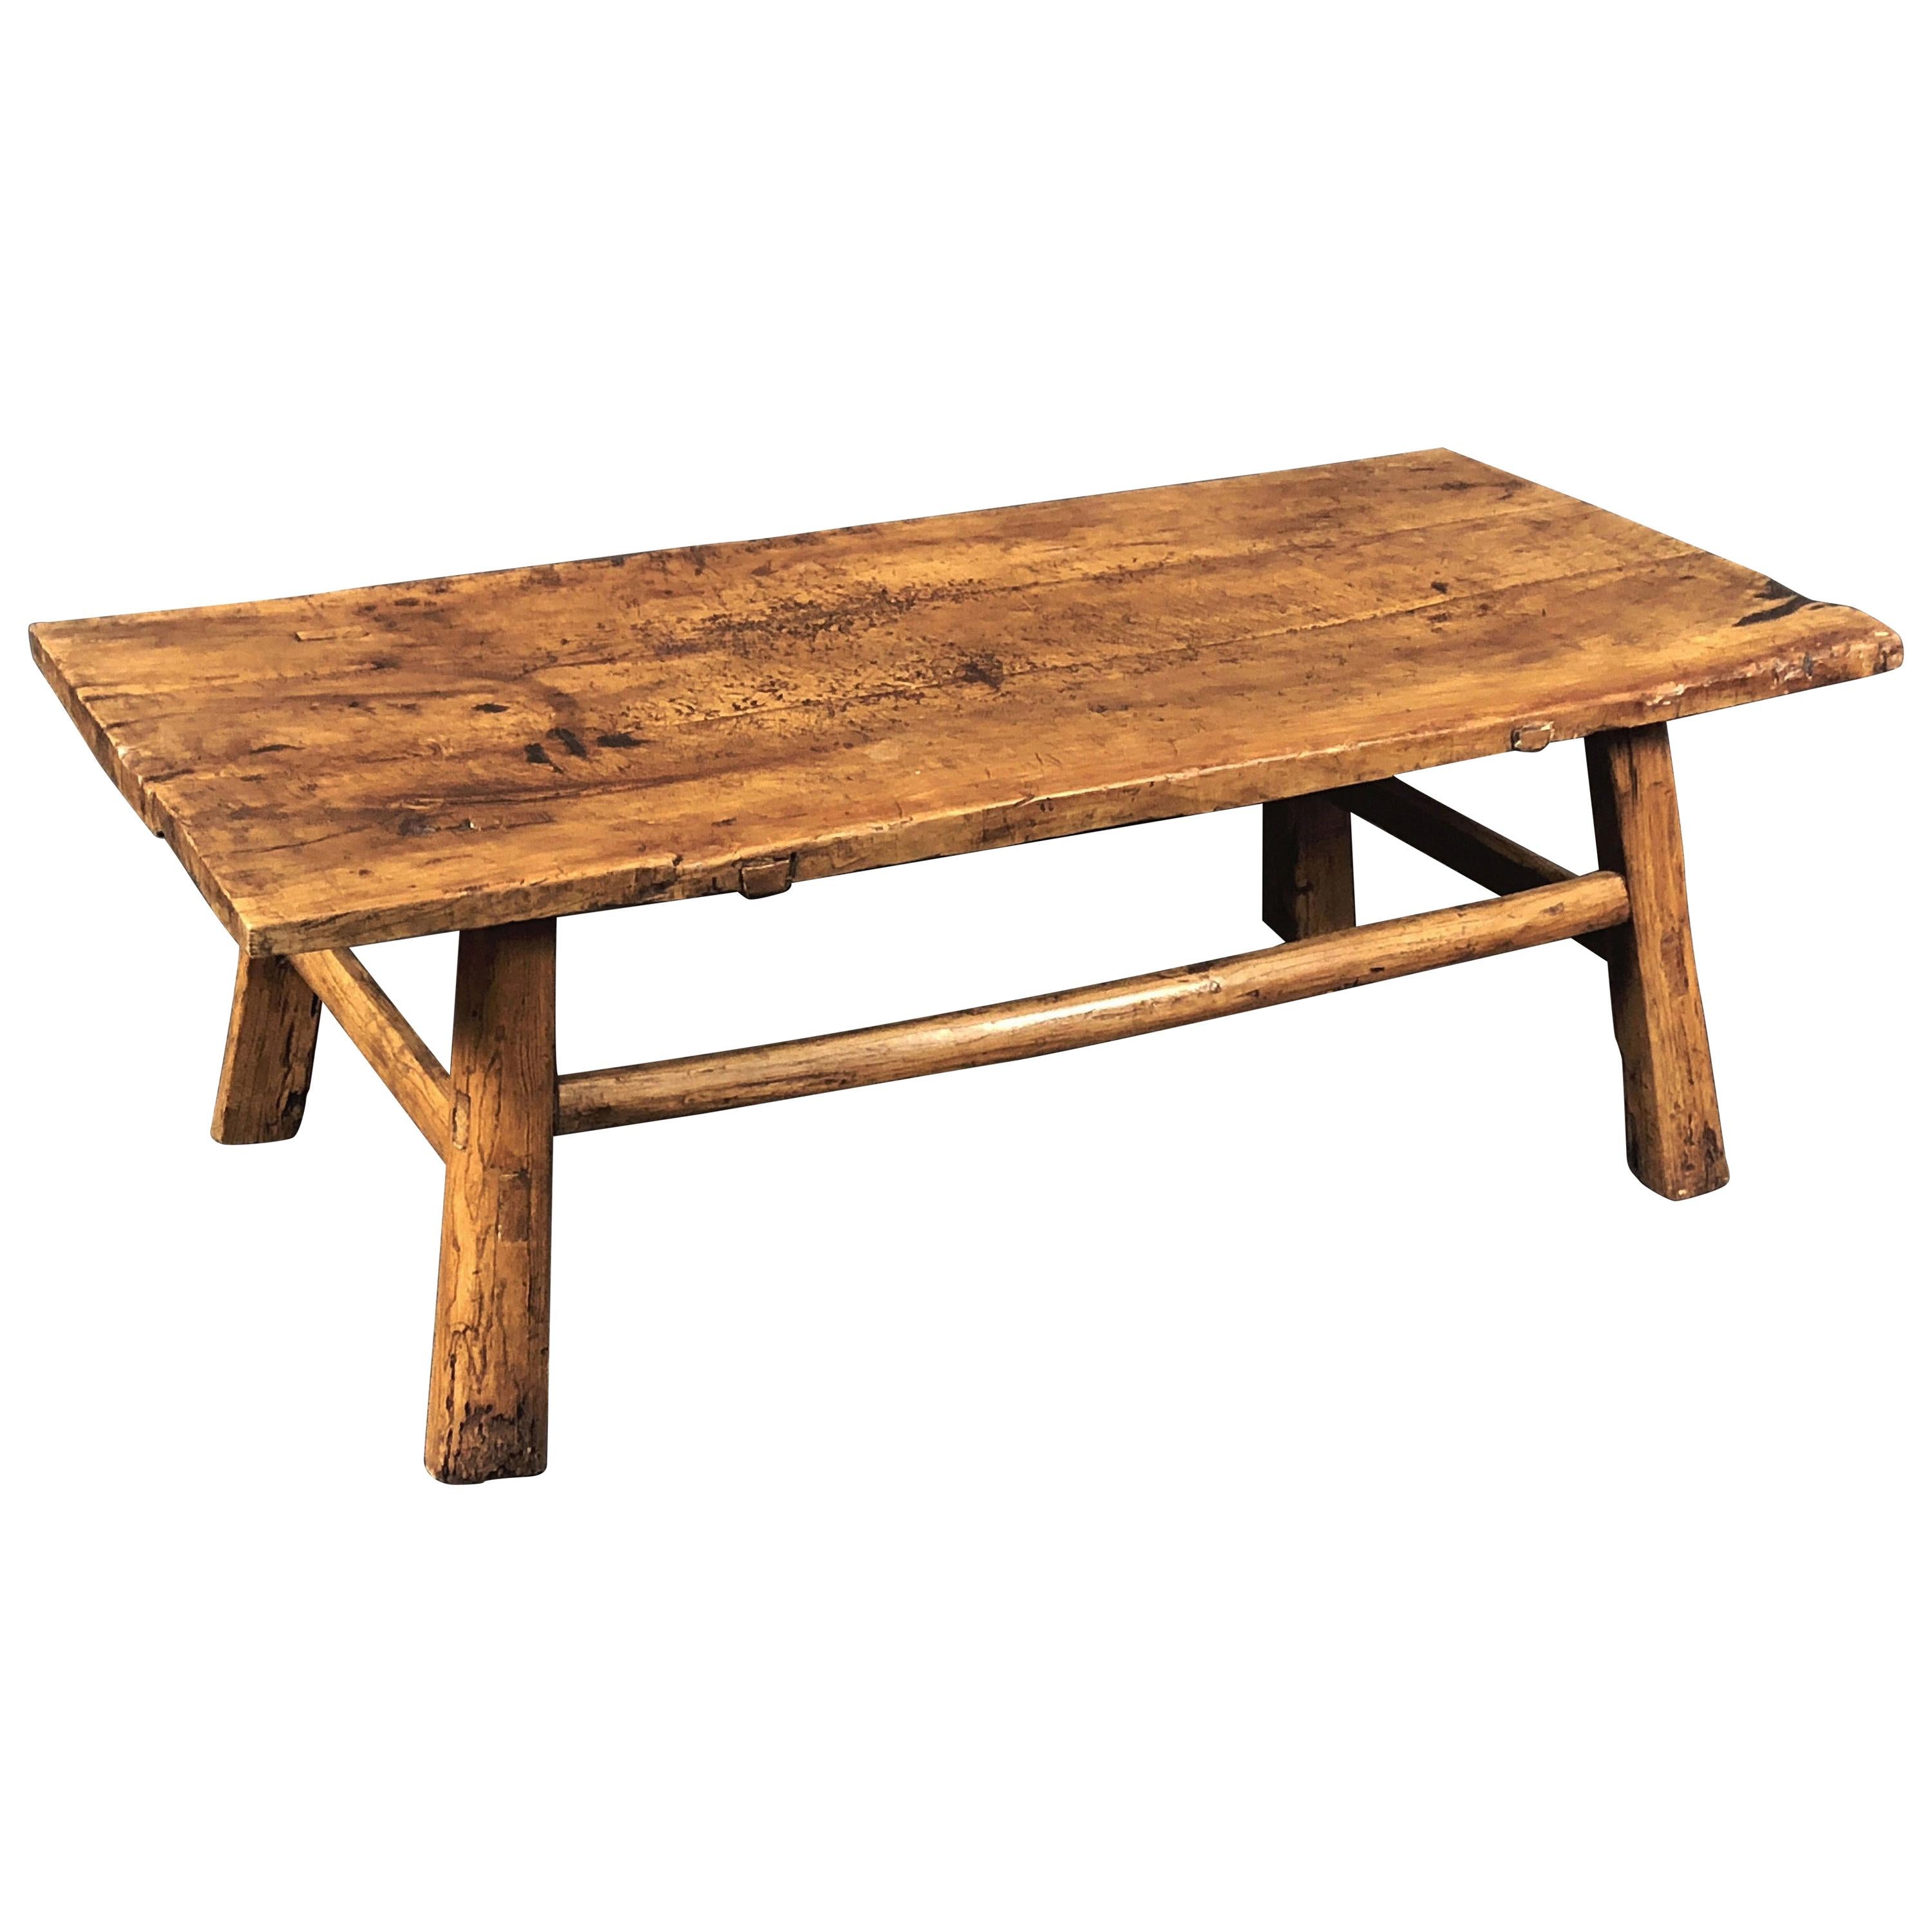 English Low Table of Fruitwood